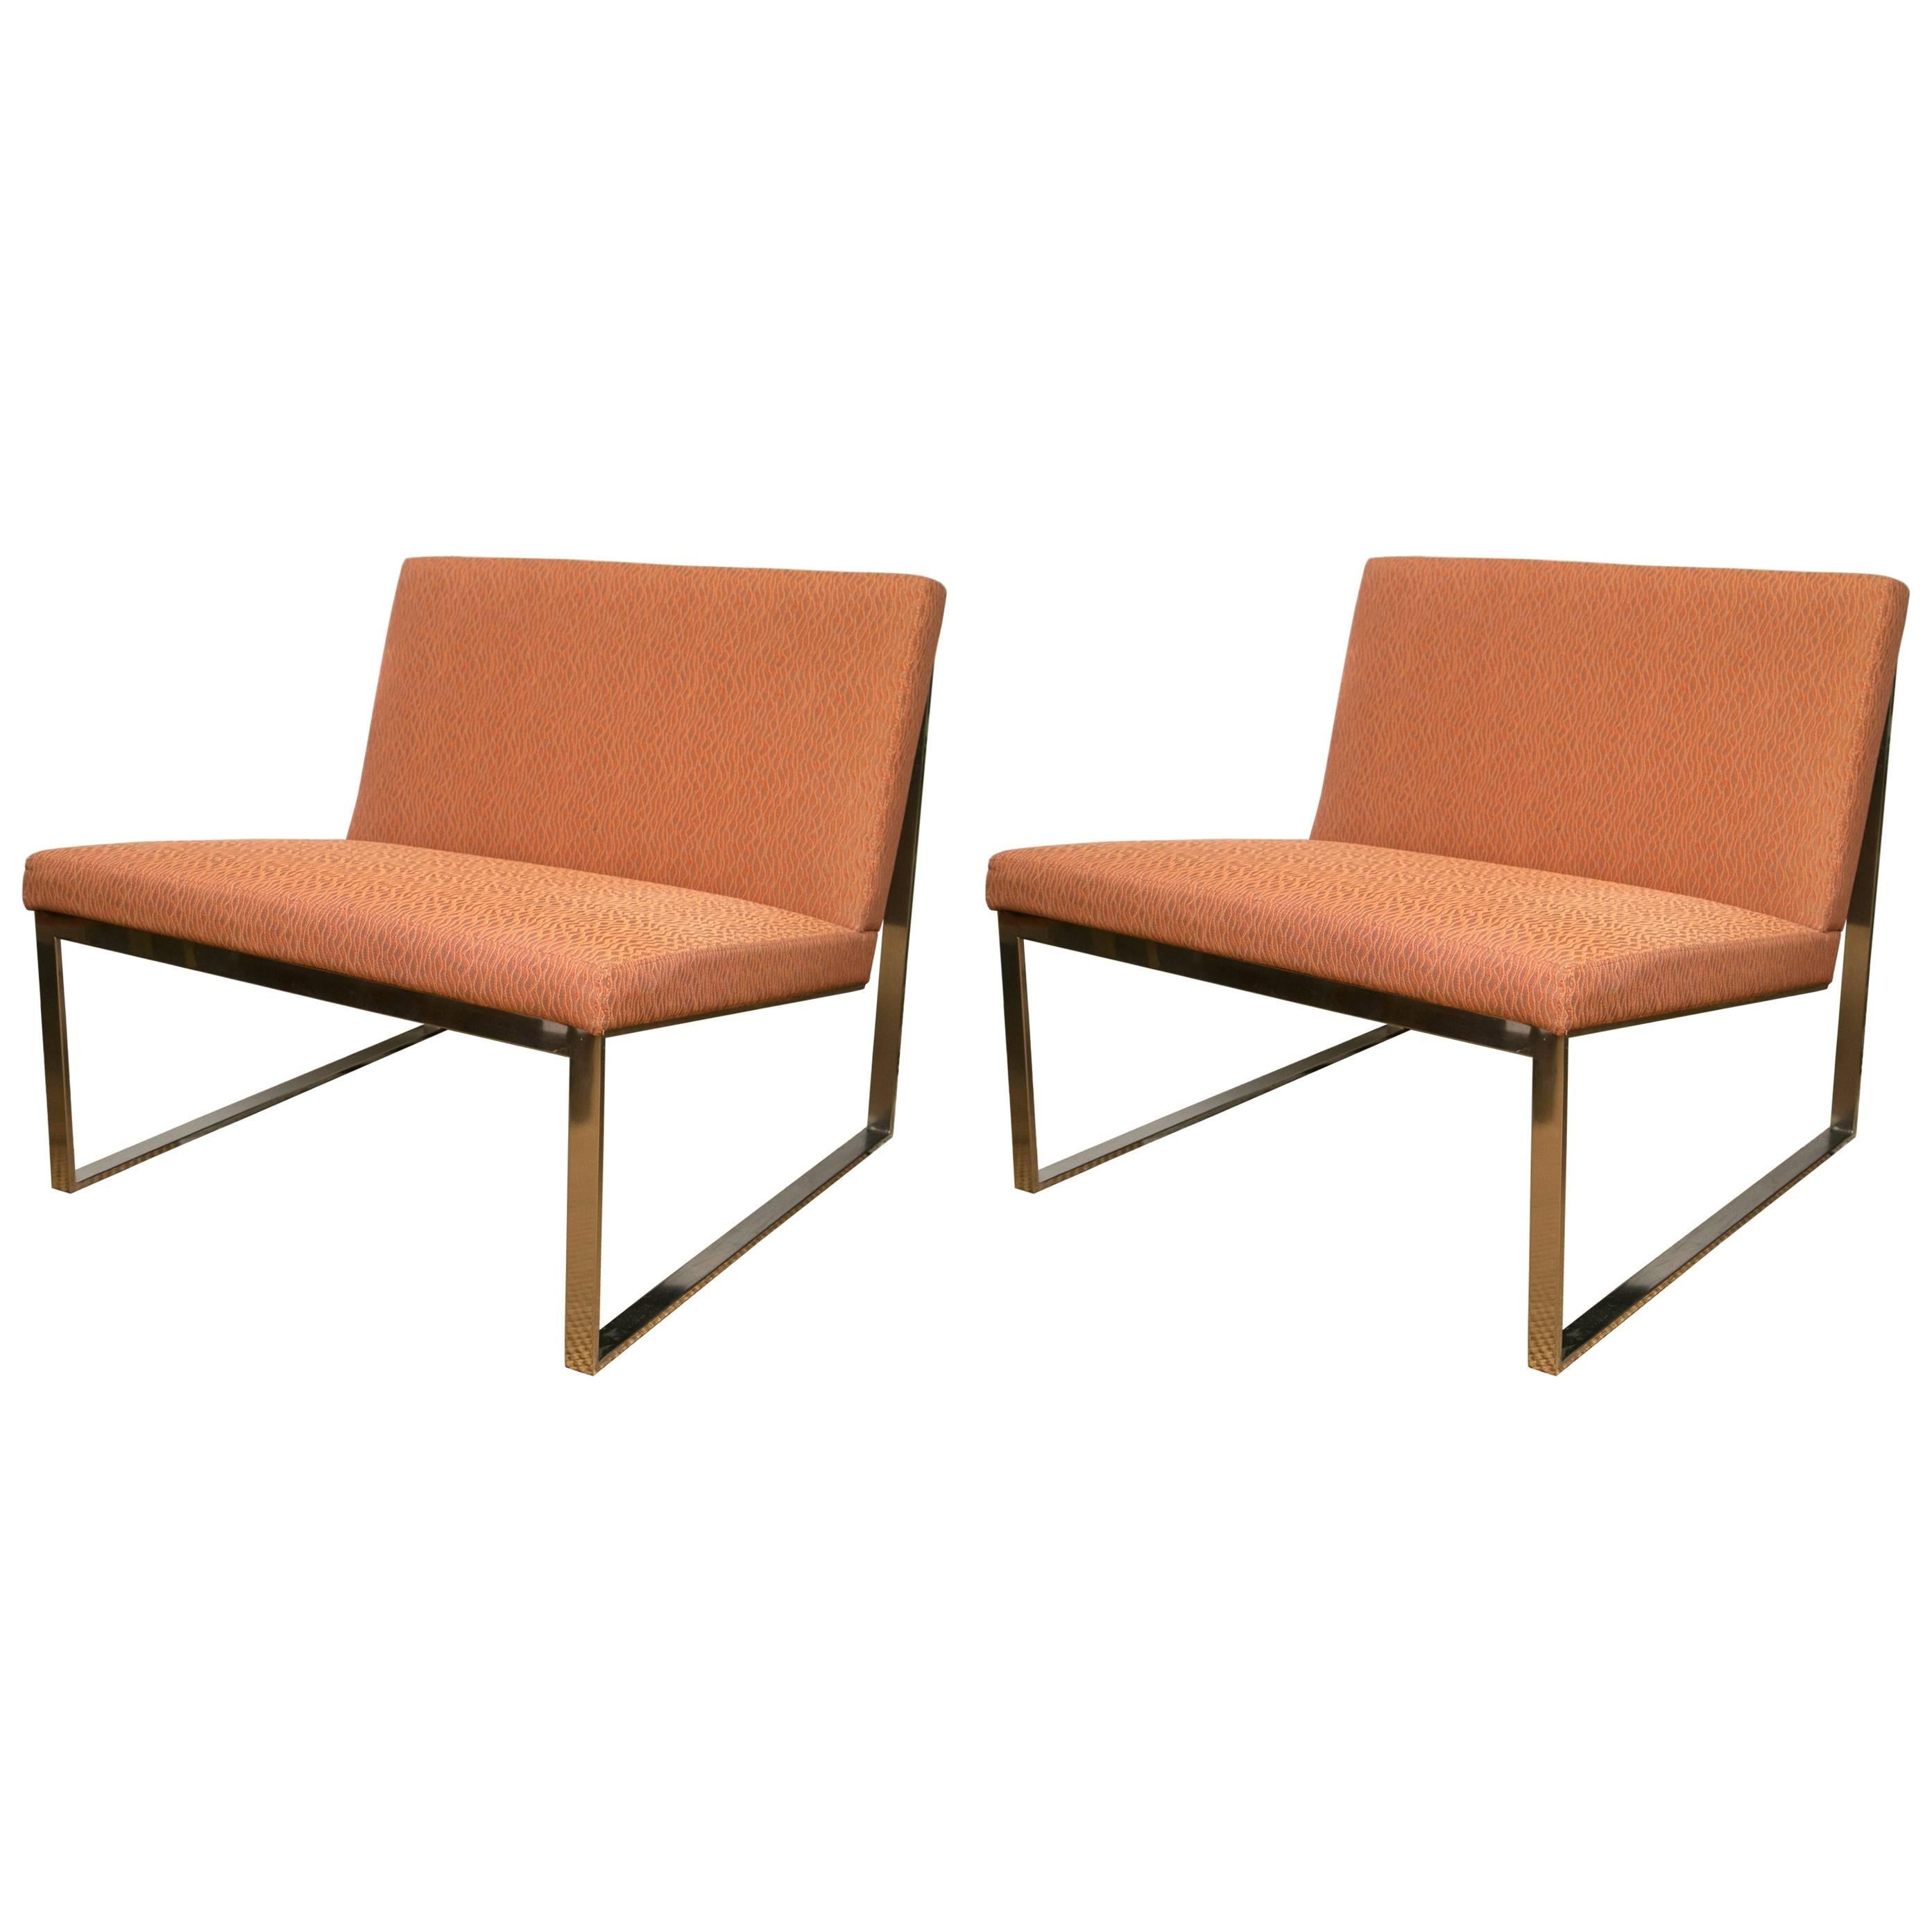 Pair of B2 Chairs by Fabien Baron for Bernhardt